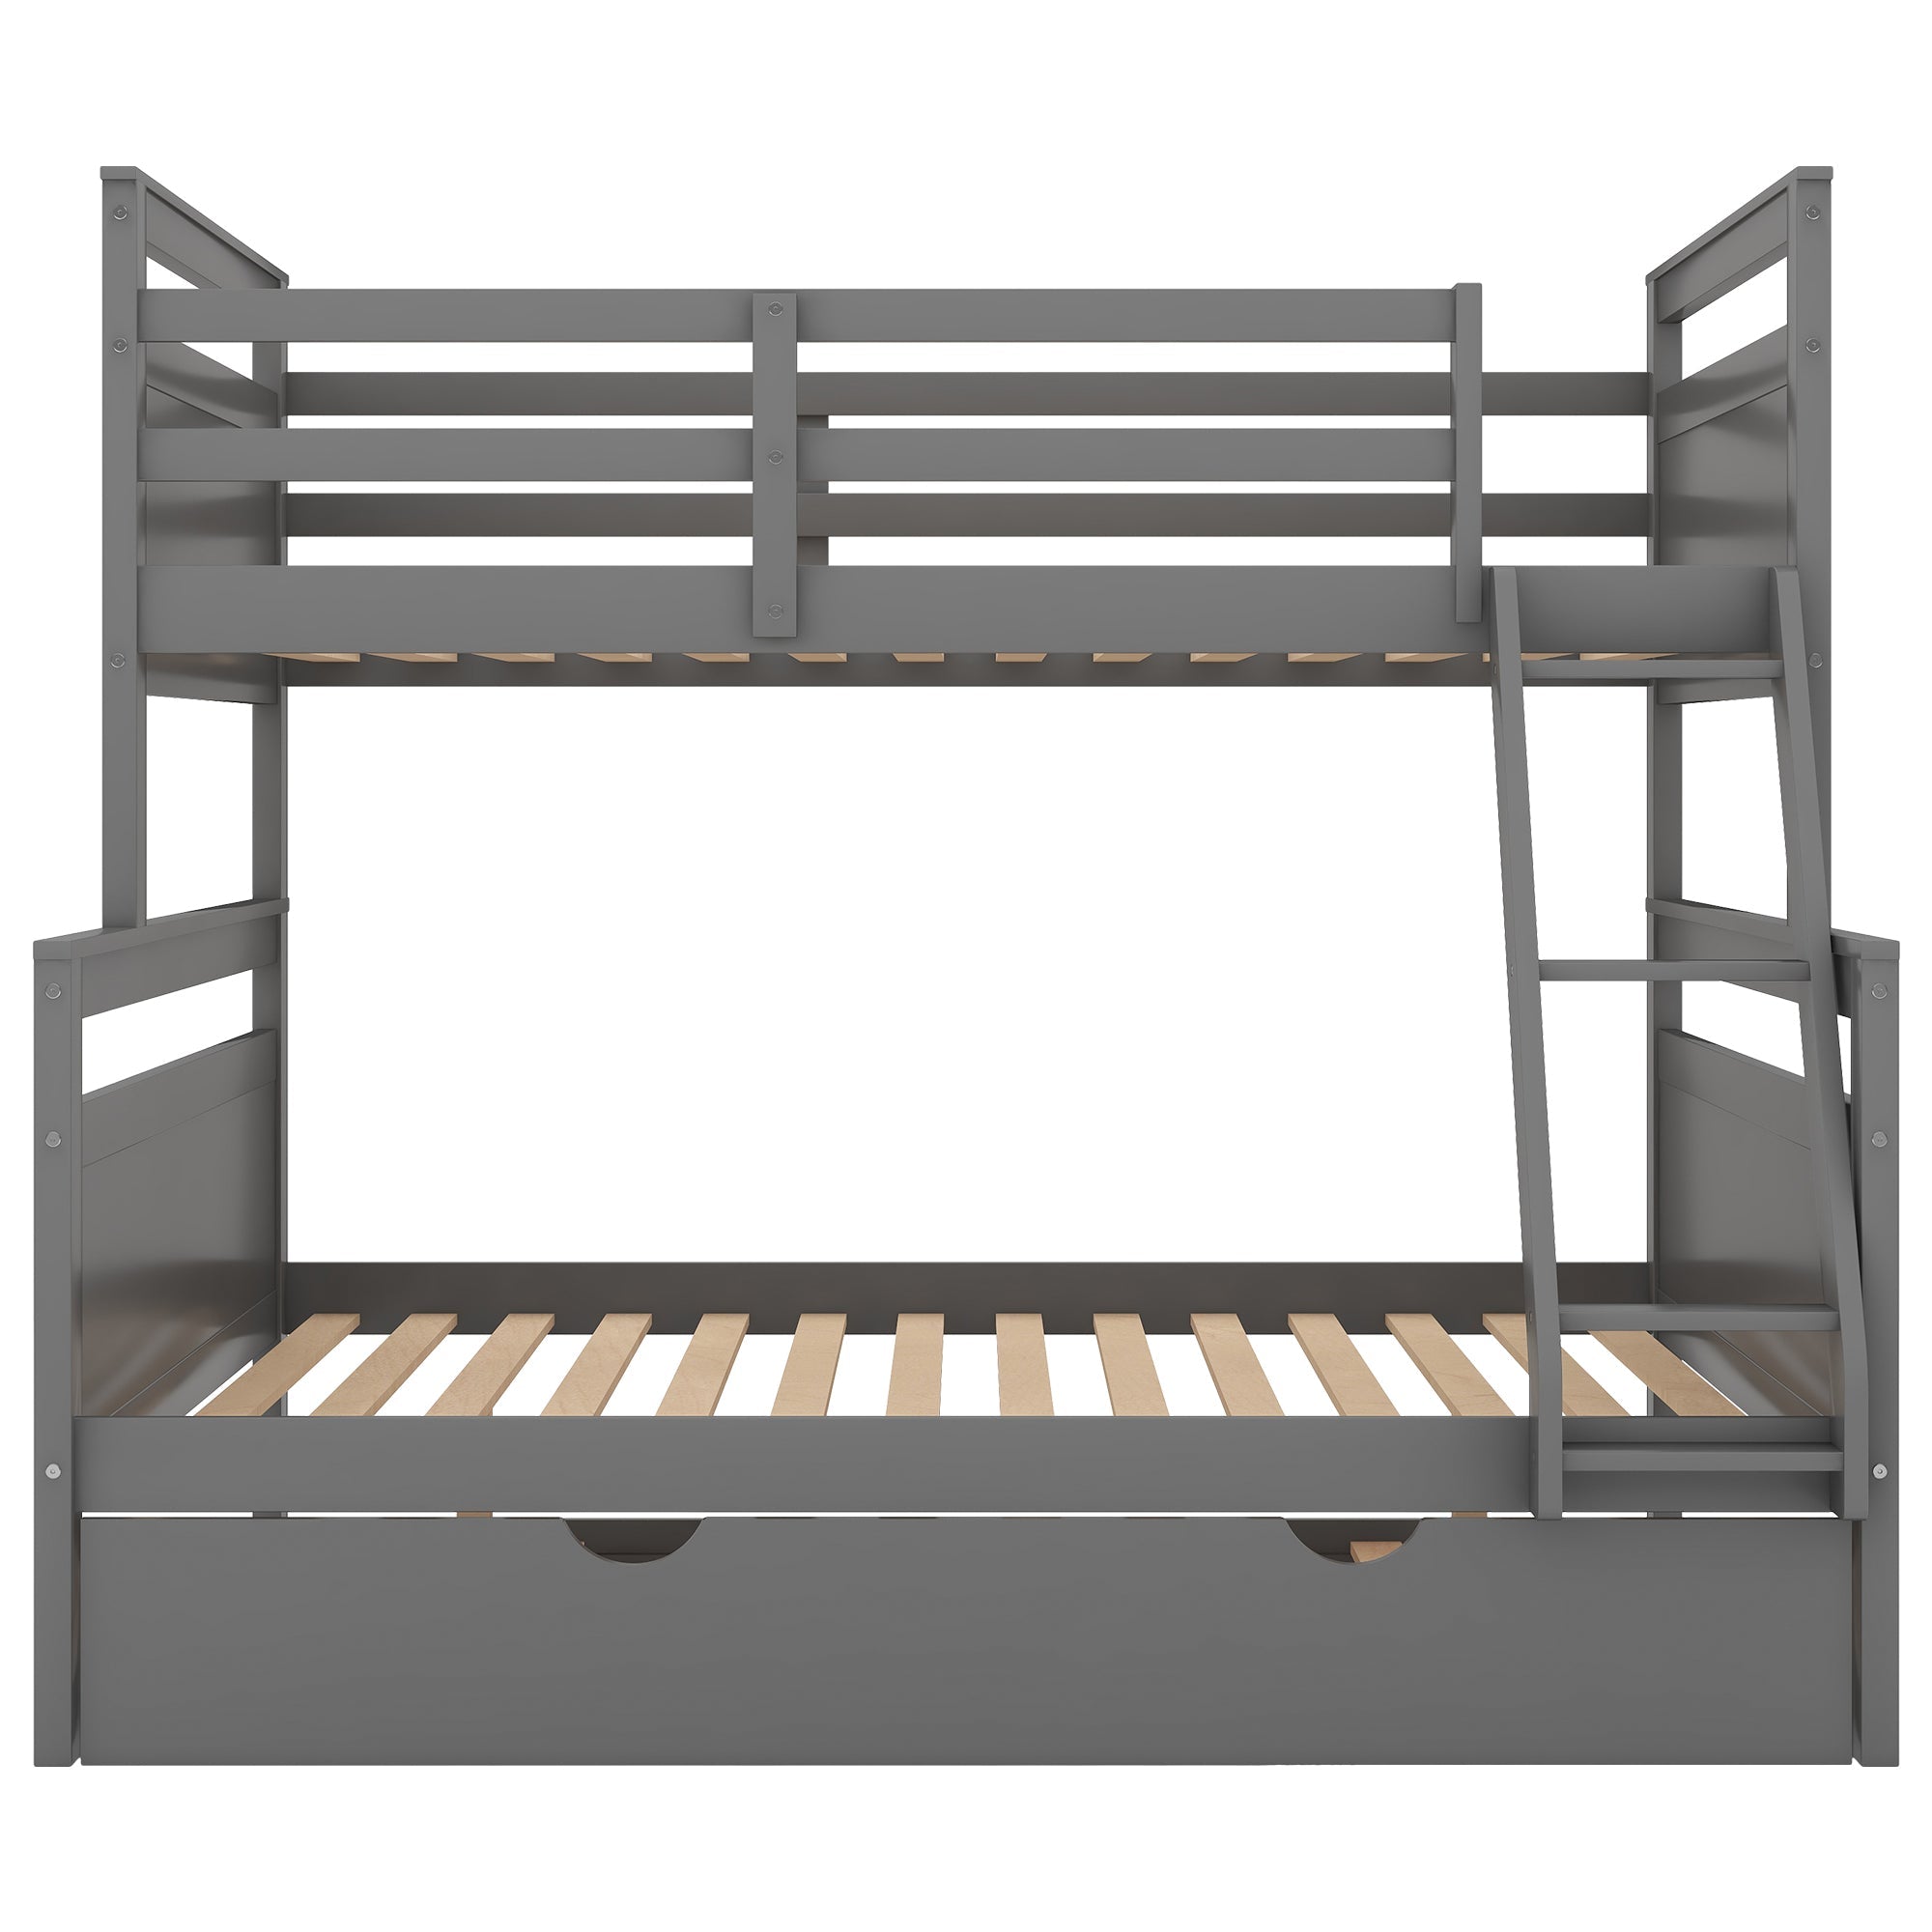 Euroco Wood Twin over Full Bunk Bed with Trundle for Kids & Adults Bedroom, Gray